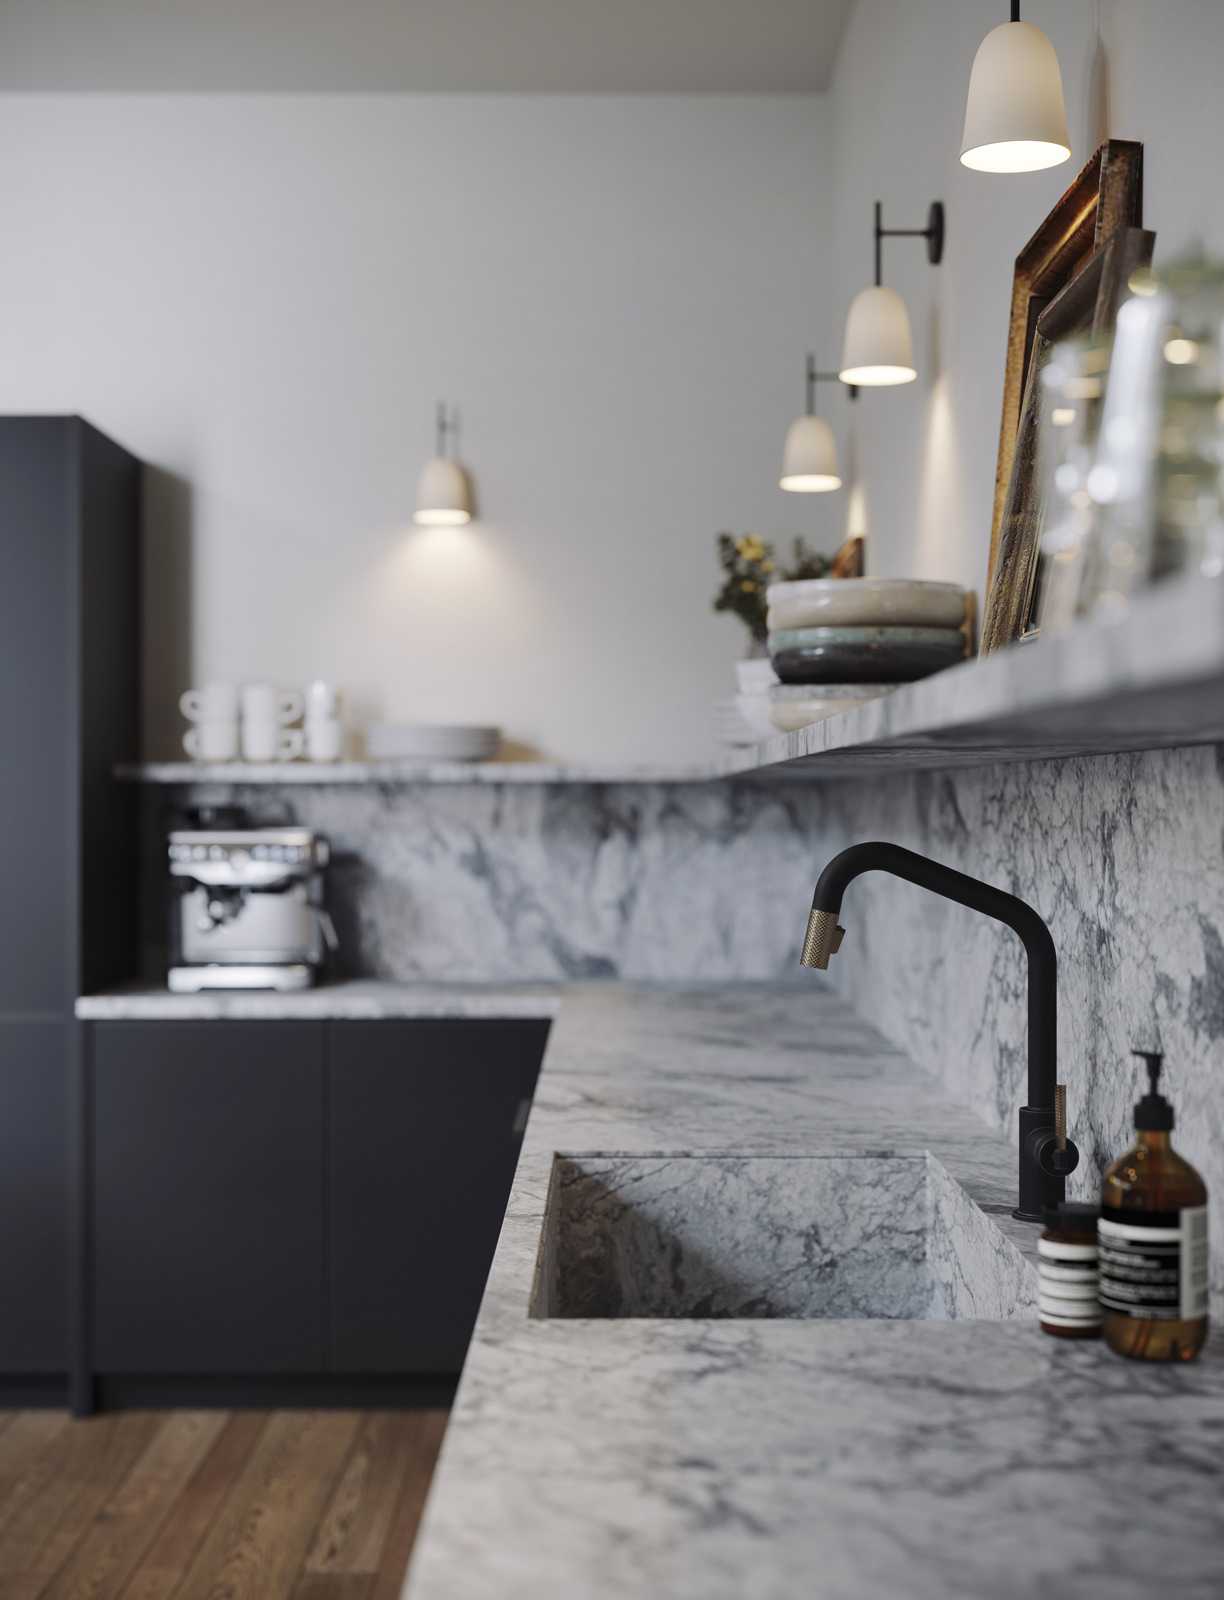 Detailed 3D rendered close-up of cooking space clad in off-white stone with blackish veins with the main focus on a sink with a black faucet